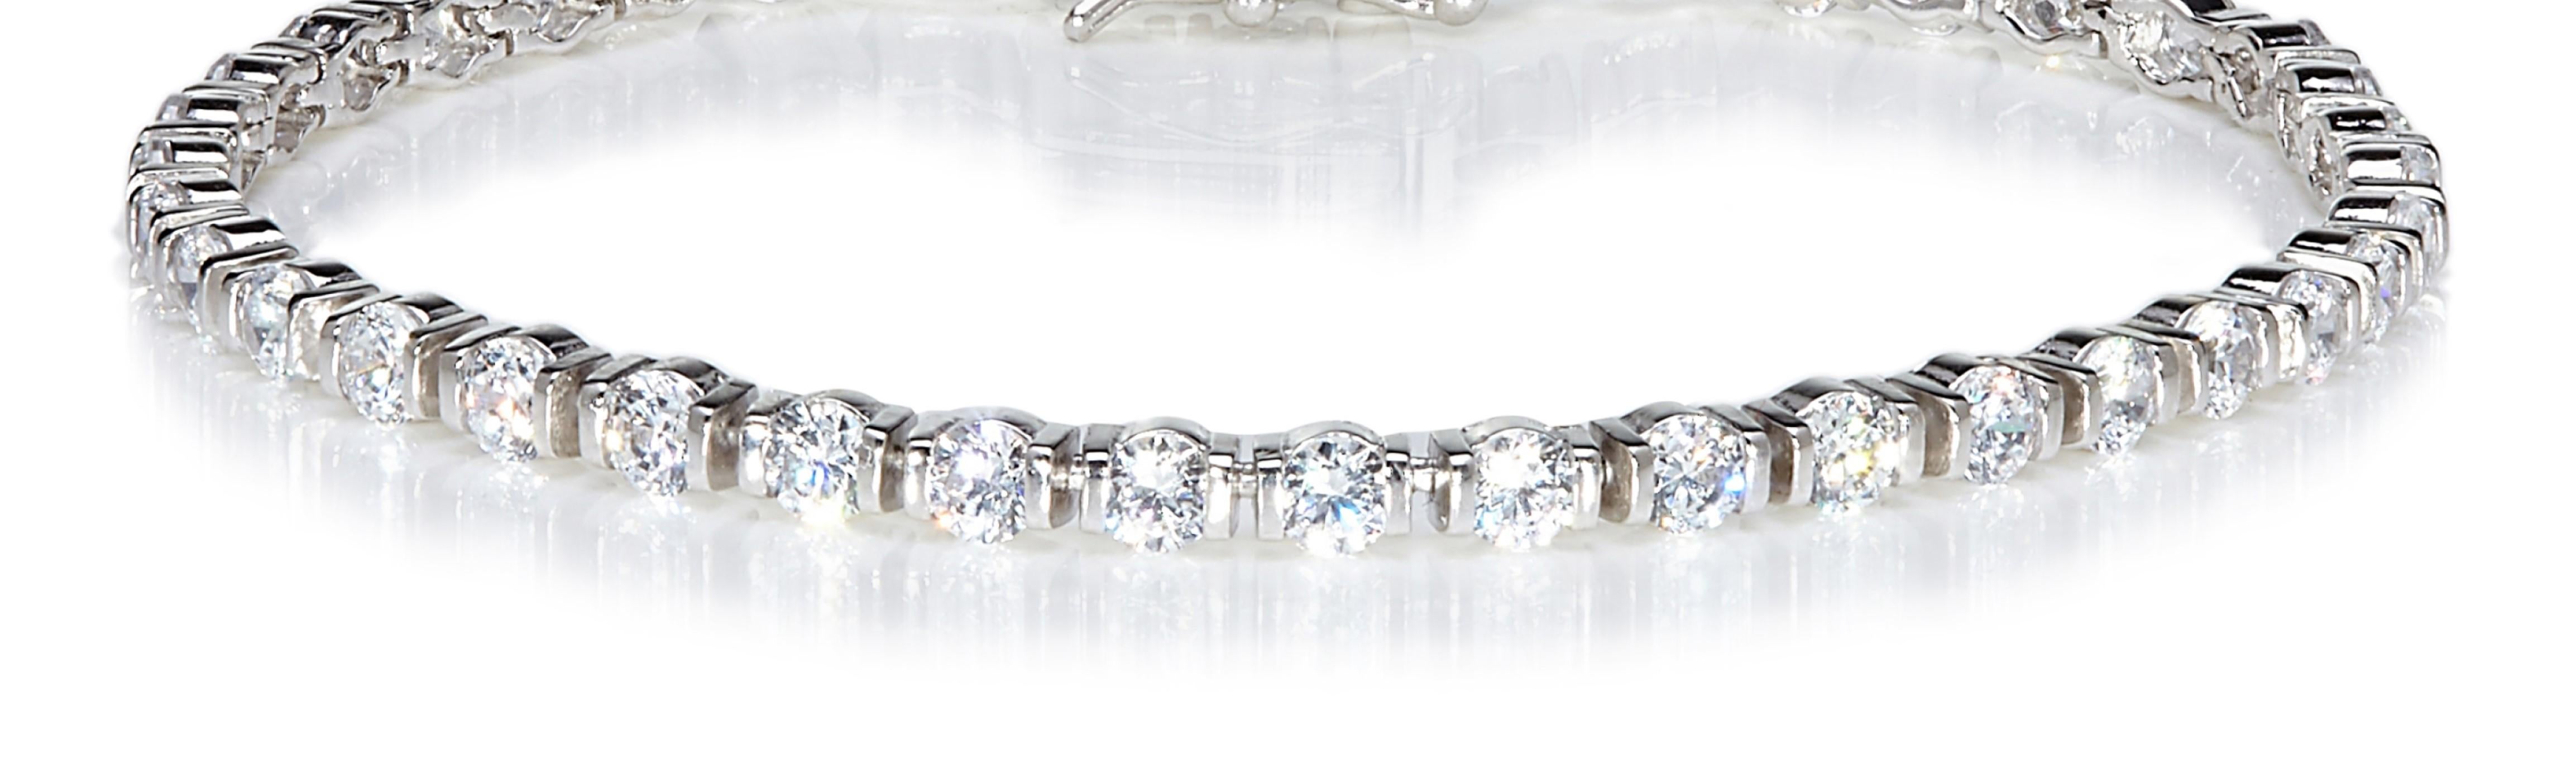 This intriguing line bracelet is set with 40 perfectly matched round brilliant cut cubic zirconia cleverly set to look like oval shaped stones..

Featuring 7.20ct cubic zirconia, set in 925 sterling silver with a high gloss white rhodium